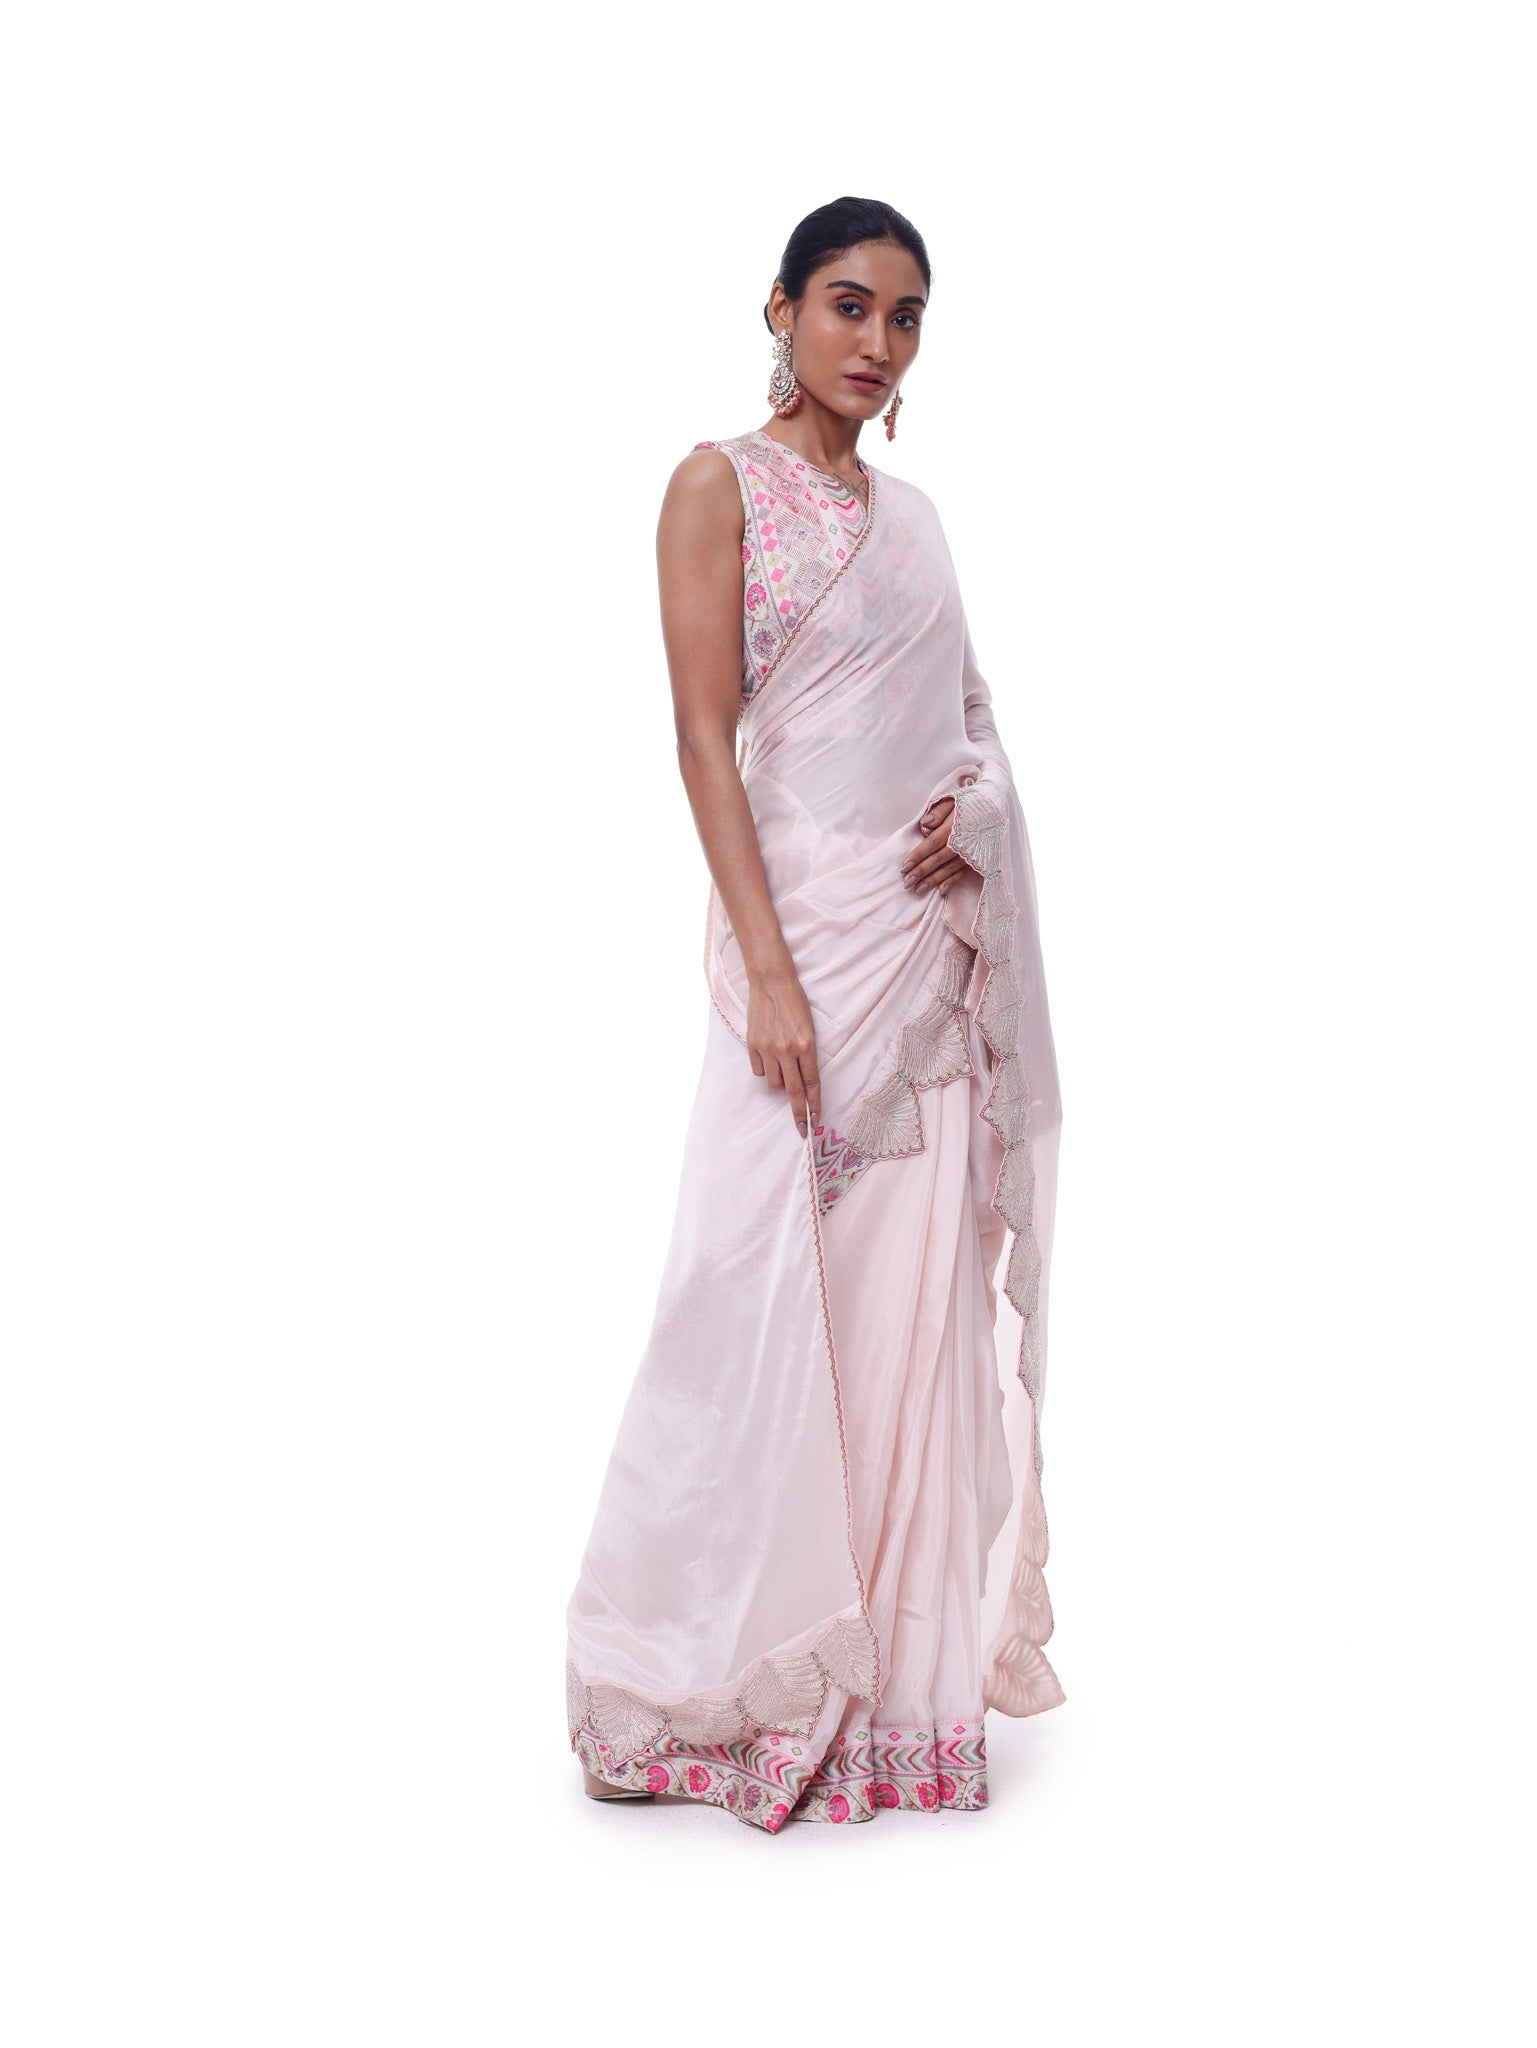 Buy powder pink chiffon saree online in USA with scalloped border and embroidered blouse. Look like a royalty in exquisite designer sarees, embroidered sarees, handwoven sarees, pure silk saris, Banarasi sarees, Kanjivaram sarees from Pure Elegance Indian saree store in USA.-side